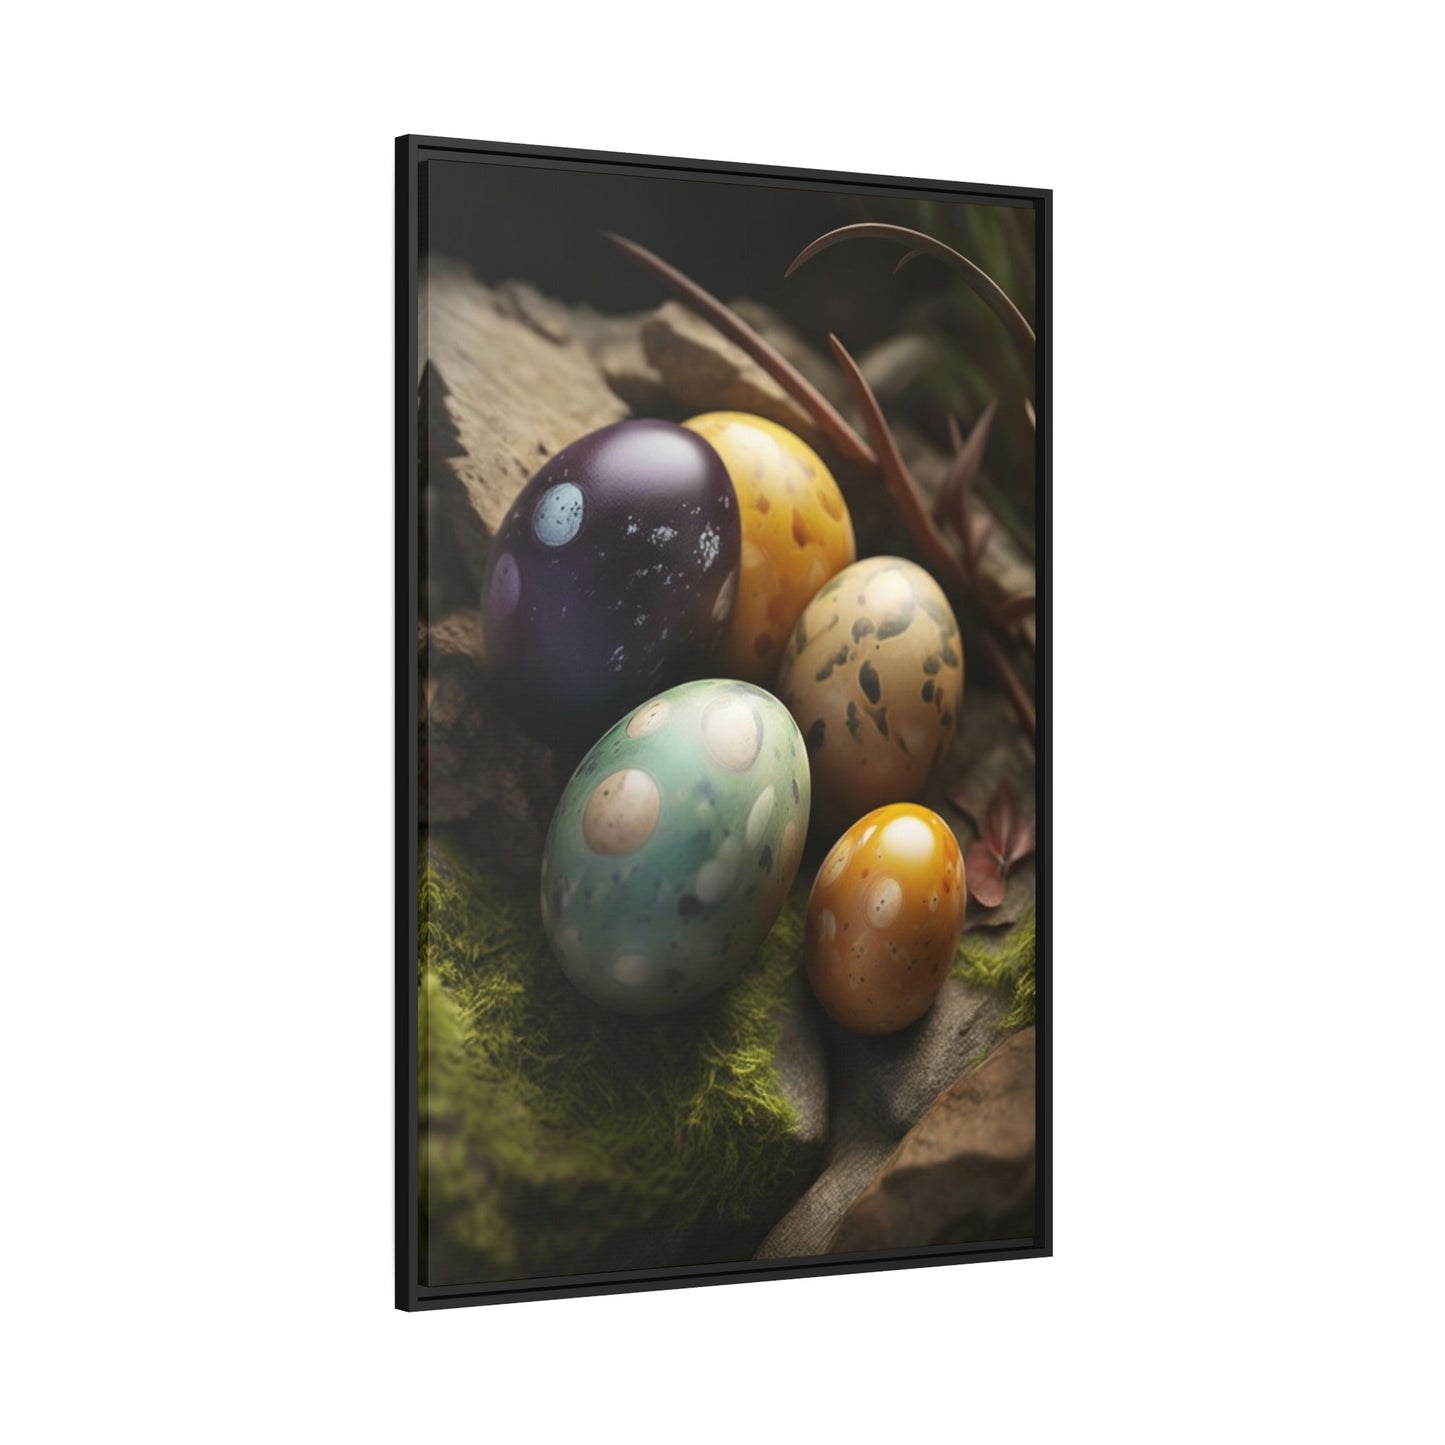 Eggcellent Adventure: A Whimsical Painting of Eggs